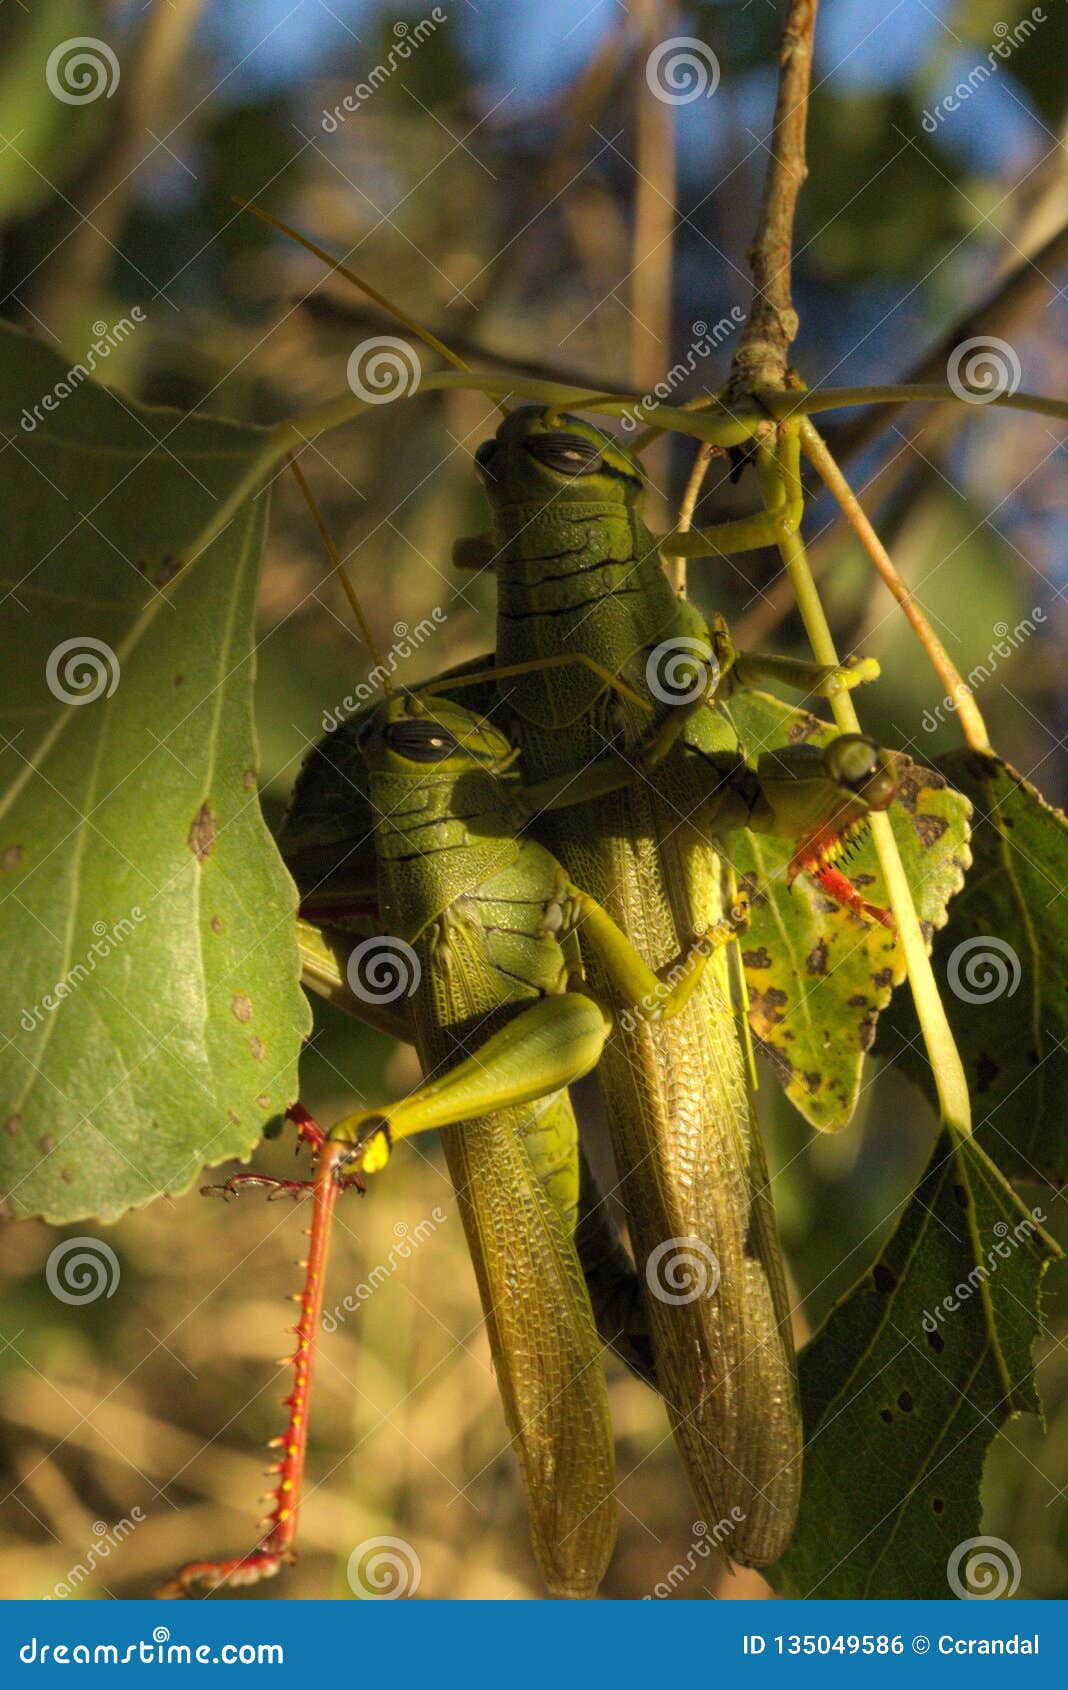 359 Grasshoppers Mating in Sunset Stock Photo Image of sunset,